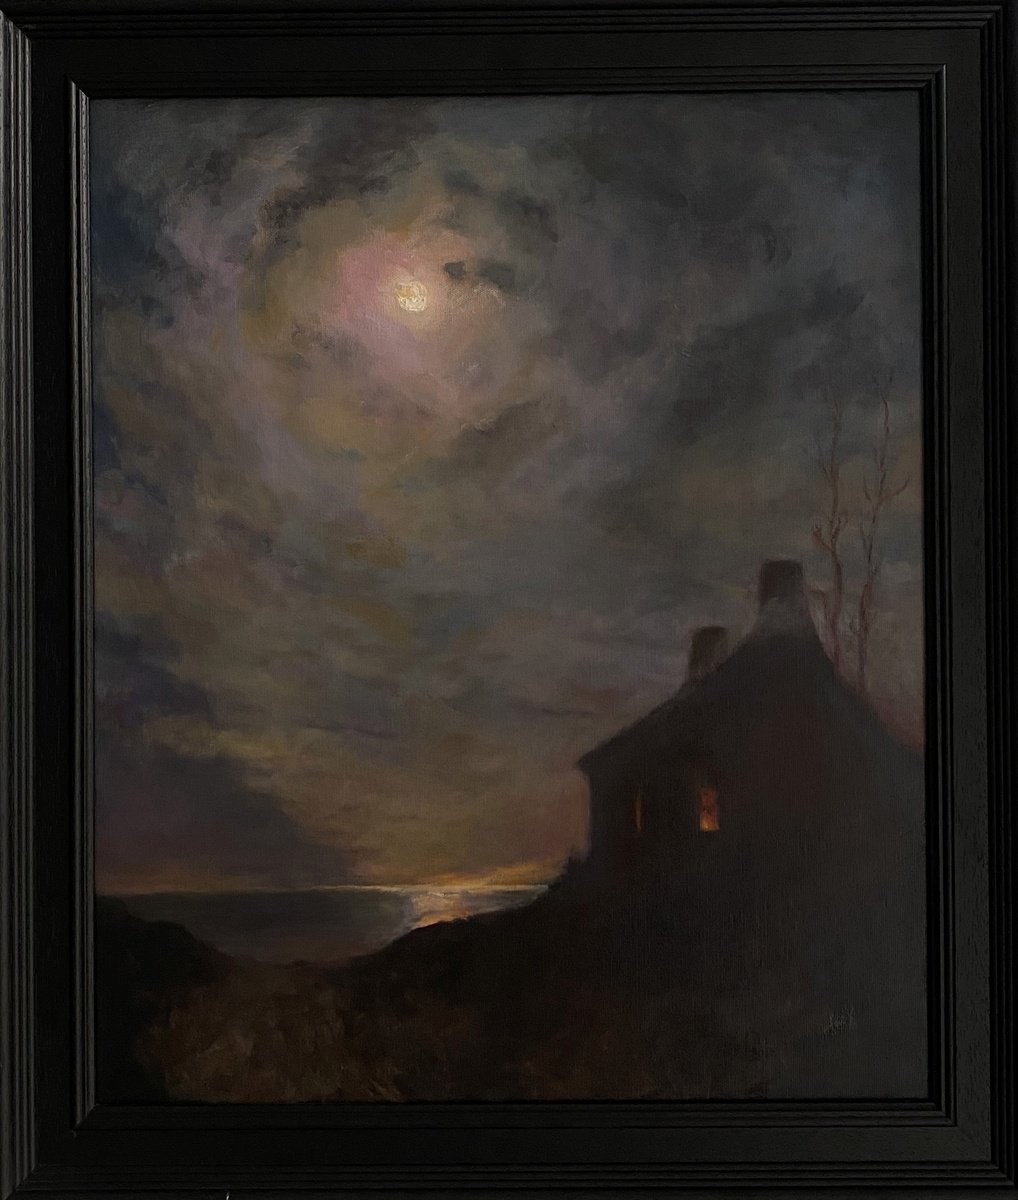 Tonalist Oil painting Landscape with Moon and Cottage, Framed. by Jackie Smith